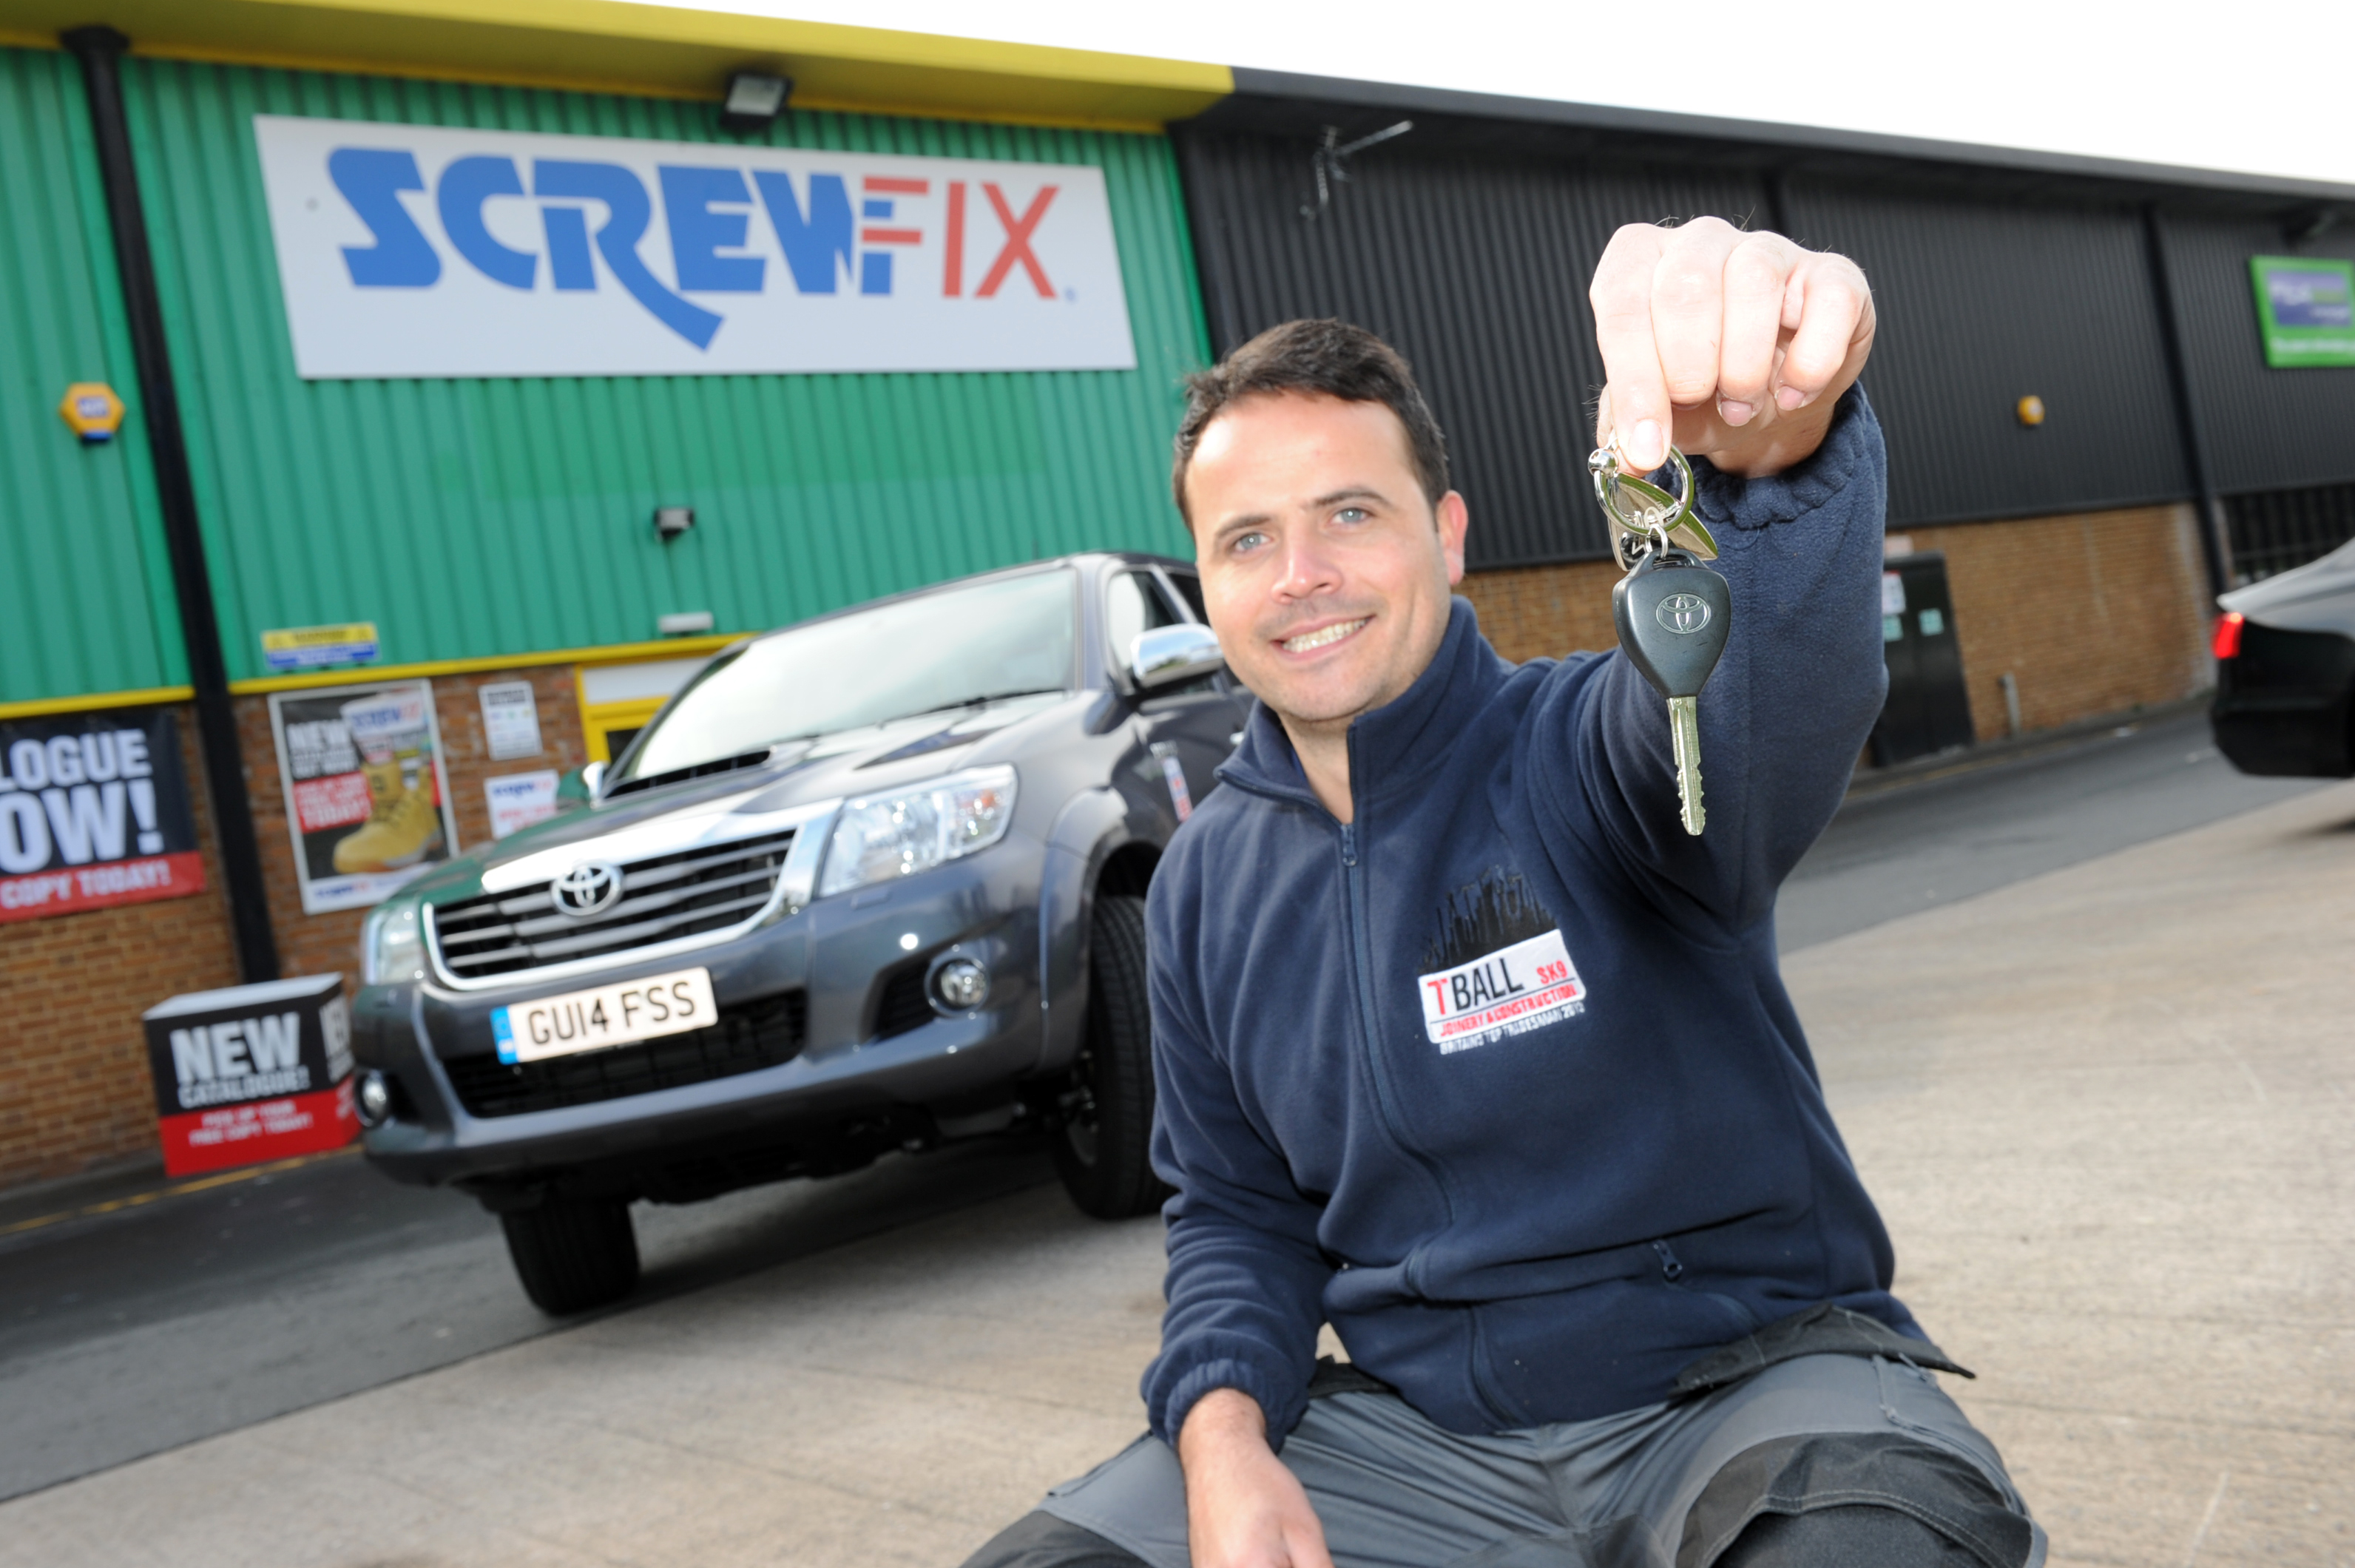 Local joiner sees business boom after winning Screwfix national competition